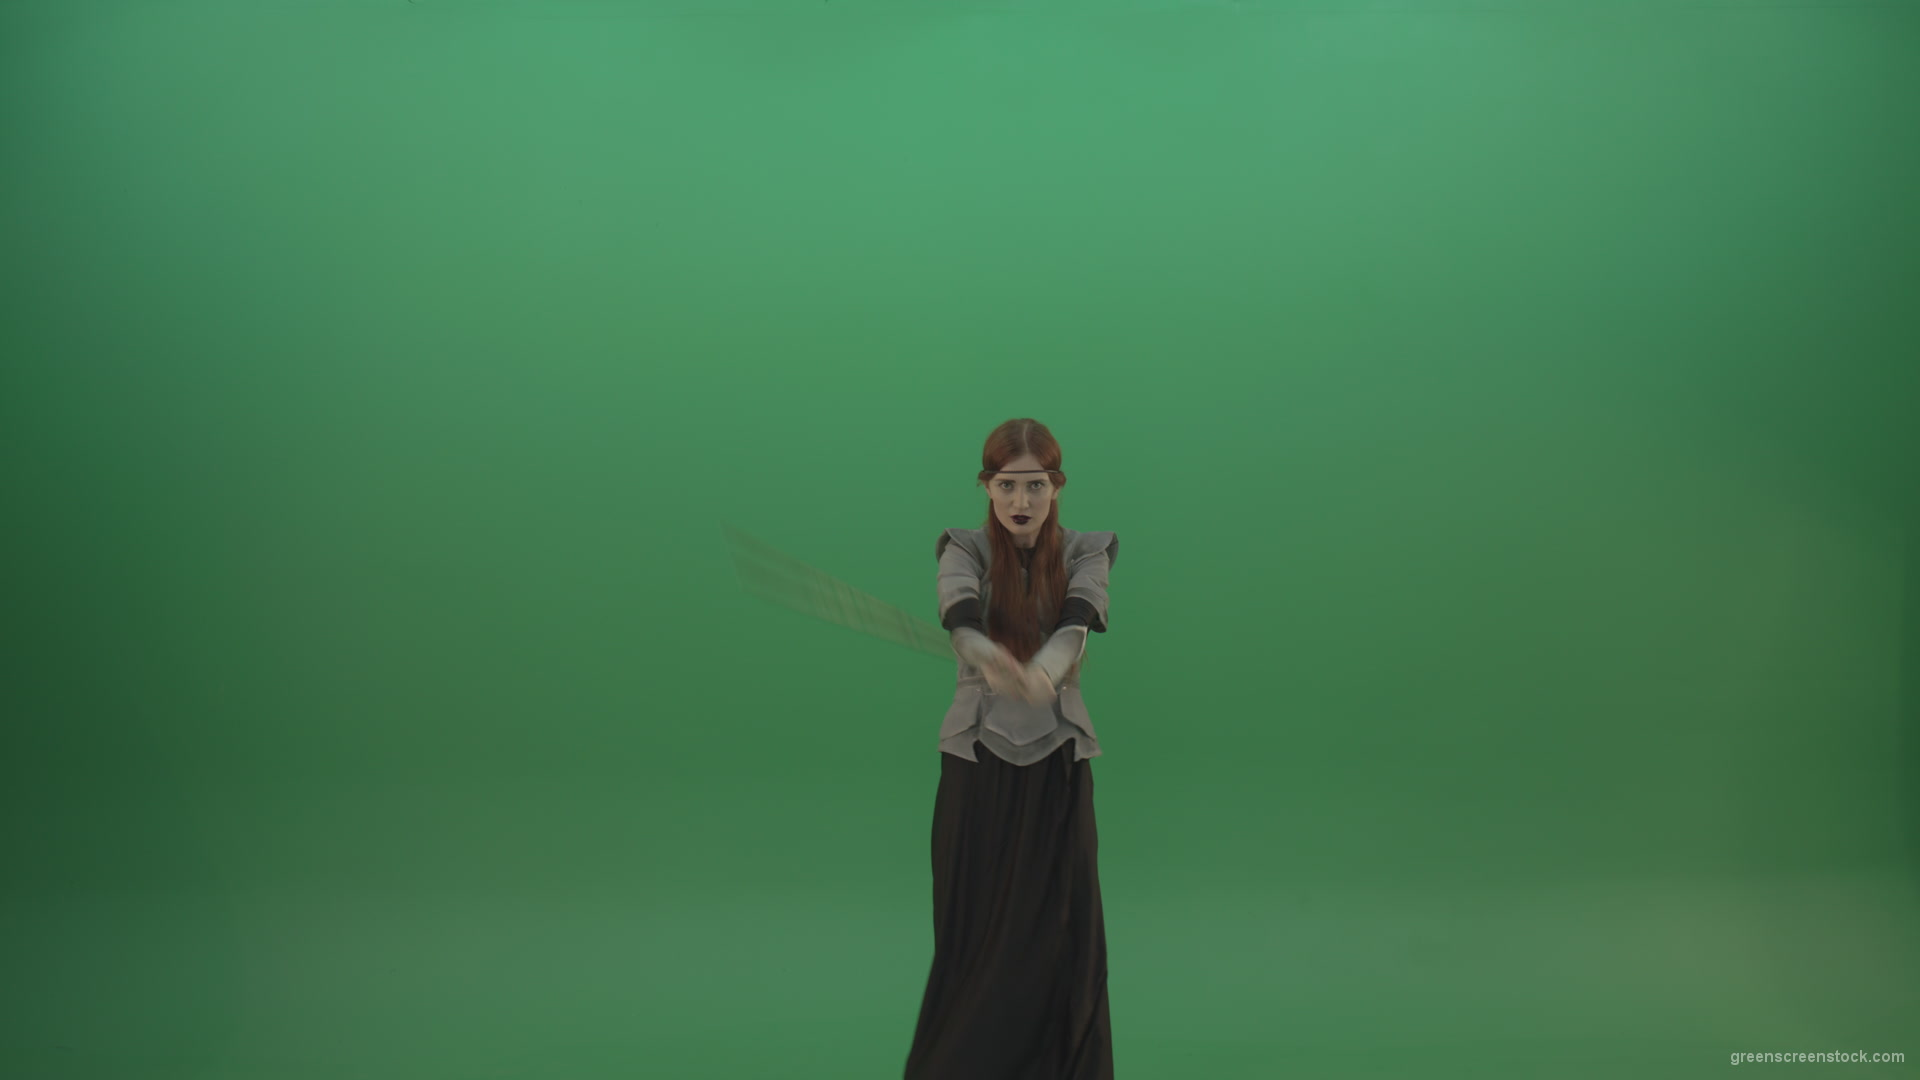 Fighting-girl-in-silver-armor-swinging-with-the-sword-aiming-at-one-goal-on-chromakey_009 Green Screen Stock